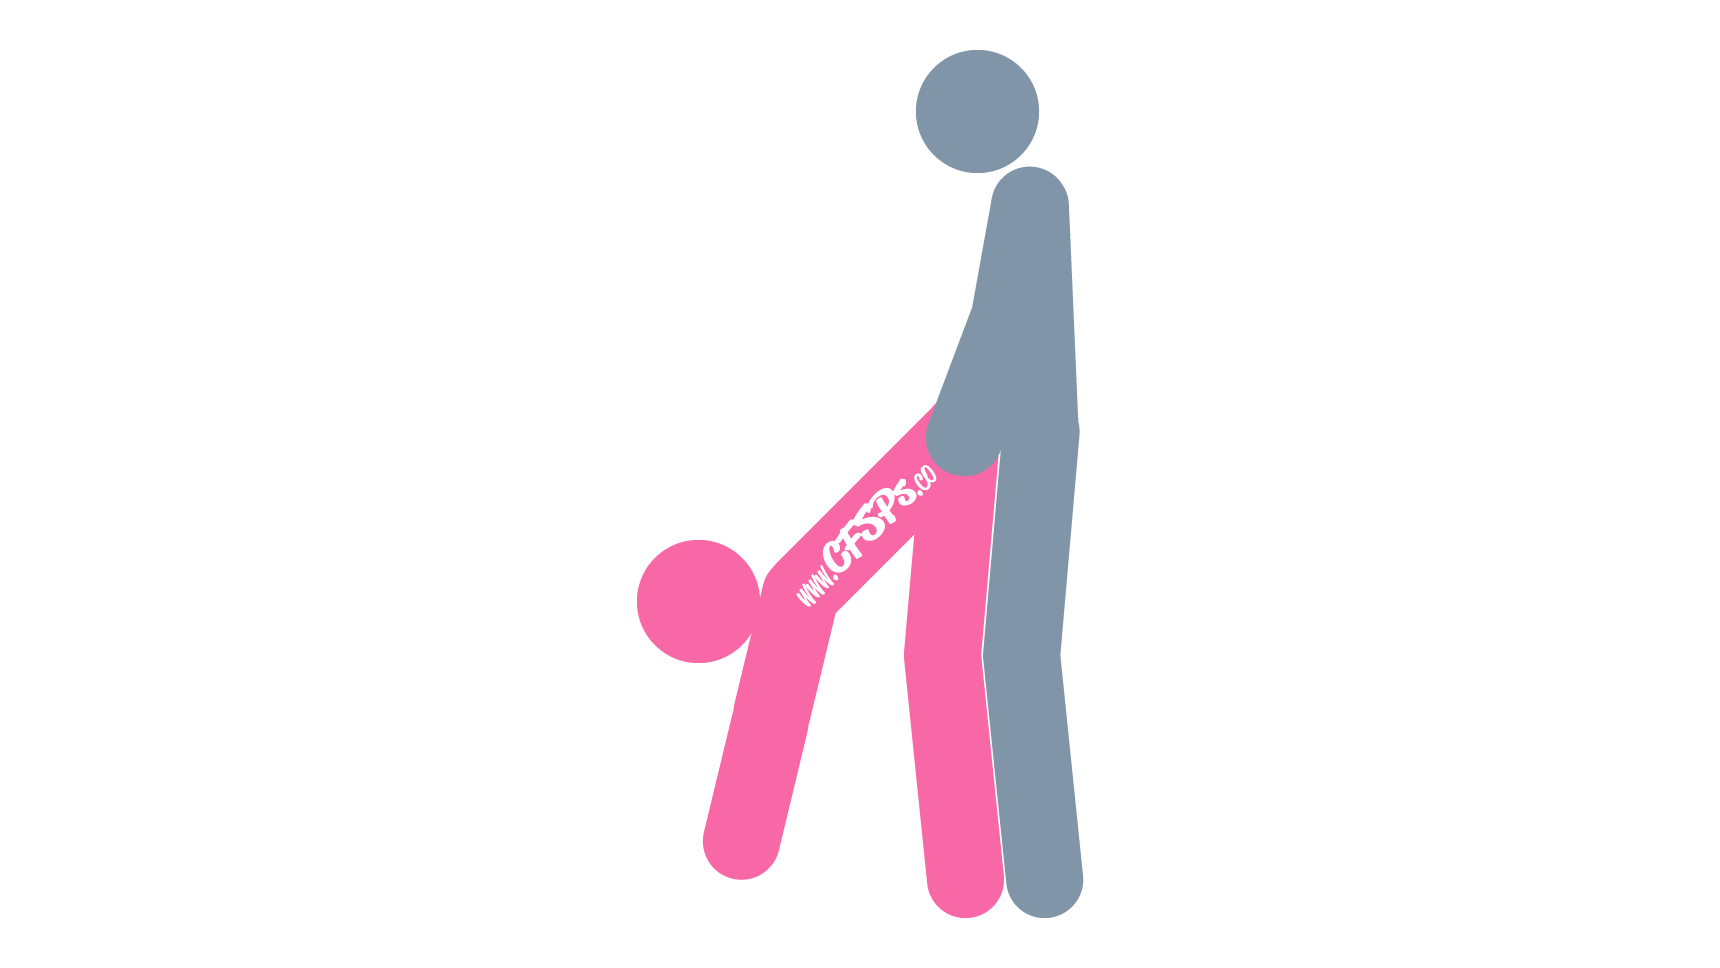 This stick figure image depicts a man and woman having sex in the Ben Dover sex position. The woman is standing with her knees bent a little, leaning forward, and touching the floor with her hands. The man is standing behind her and holding her hips.